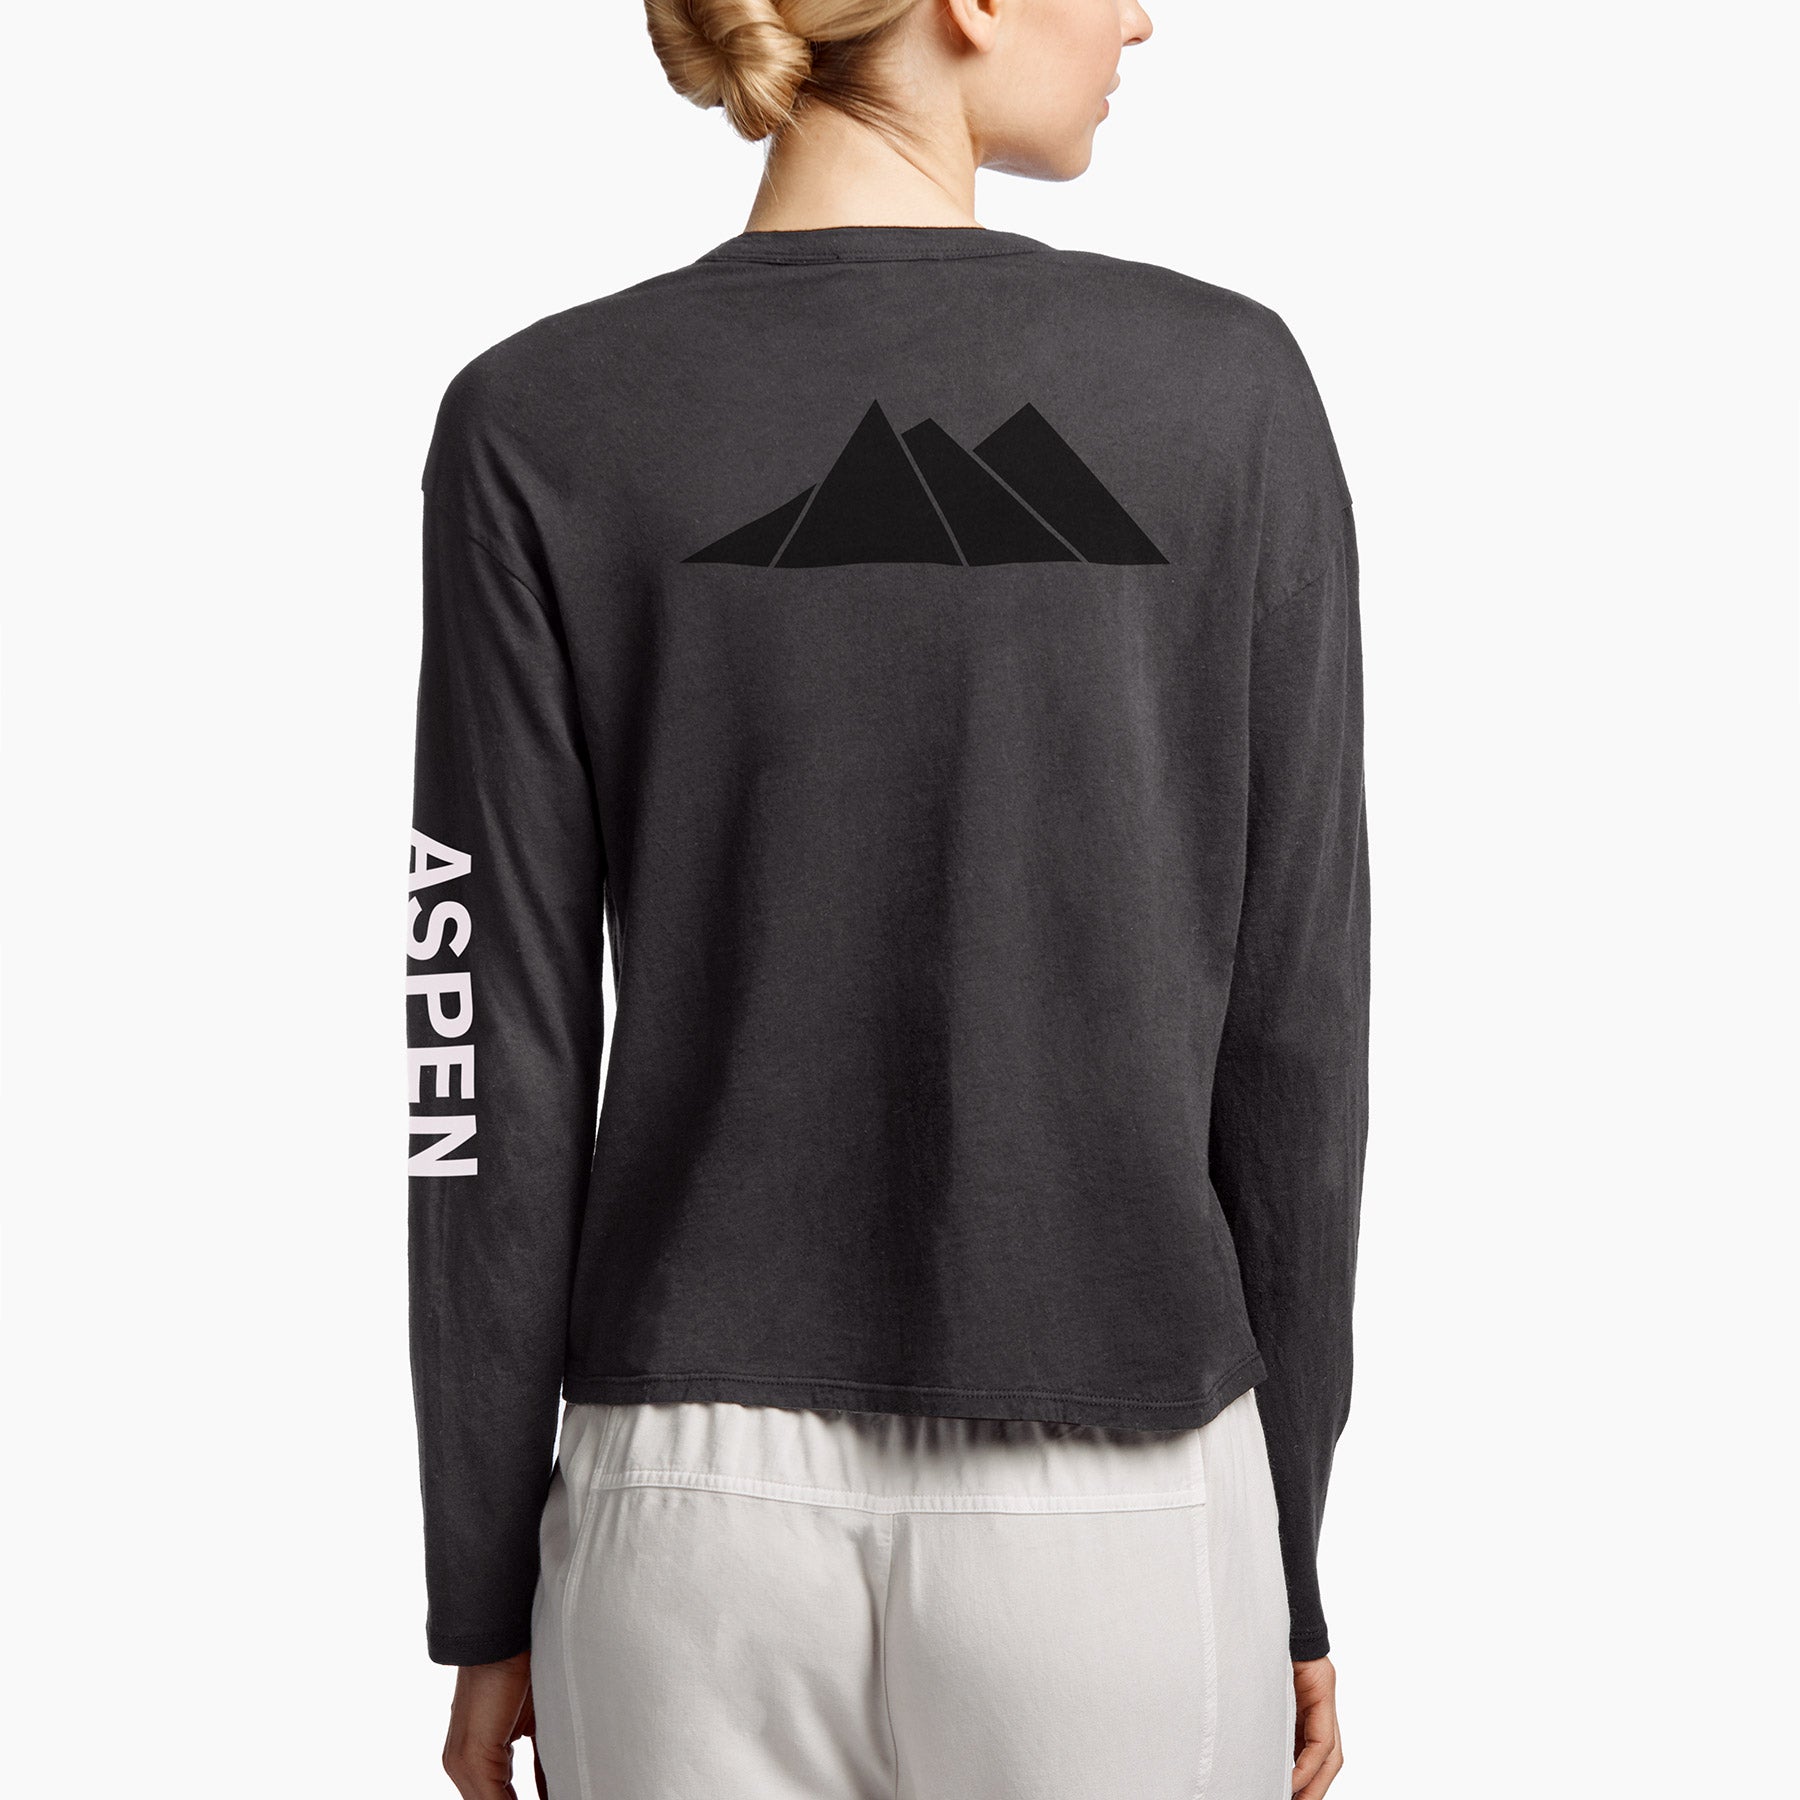 Aspen Mountain Graphic Tee in Carbon | James Perse Los Angeles